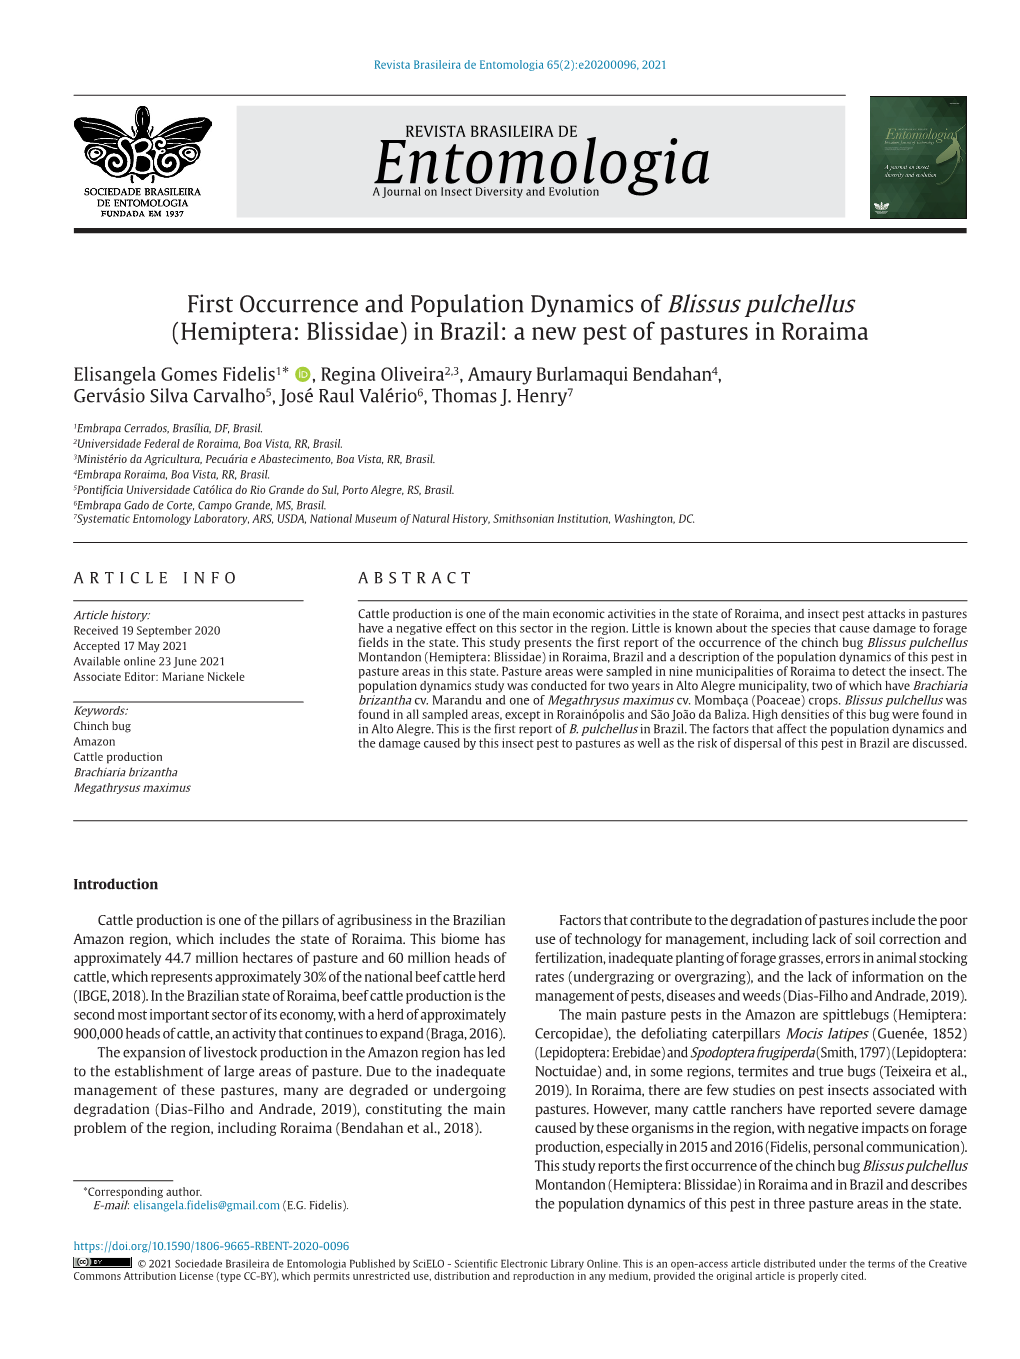 Hemiptera: Blissidae) in Brazil: a New Pest of Pastures in Roraima